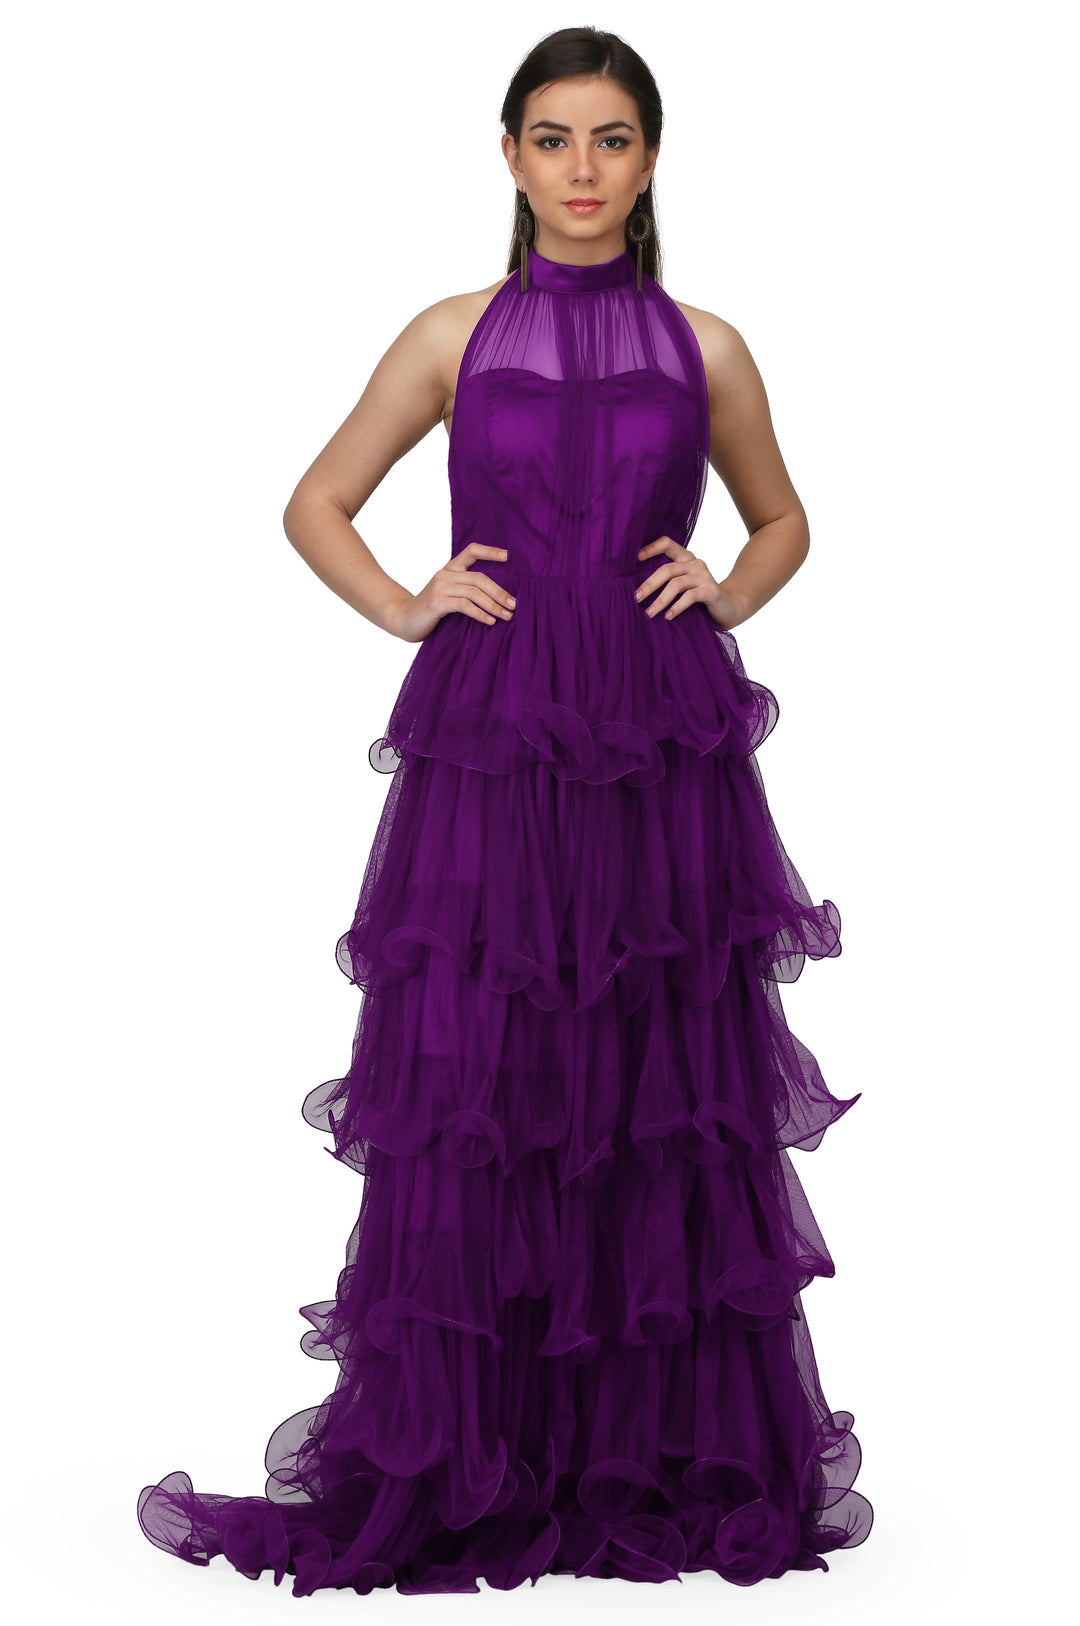 Miracolos By Ruchi's Classy Halter Neck Drape Net Party Evening Corset Gown  - Rent